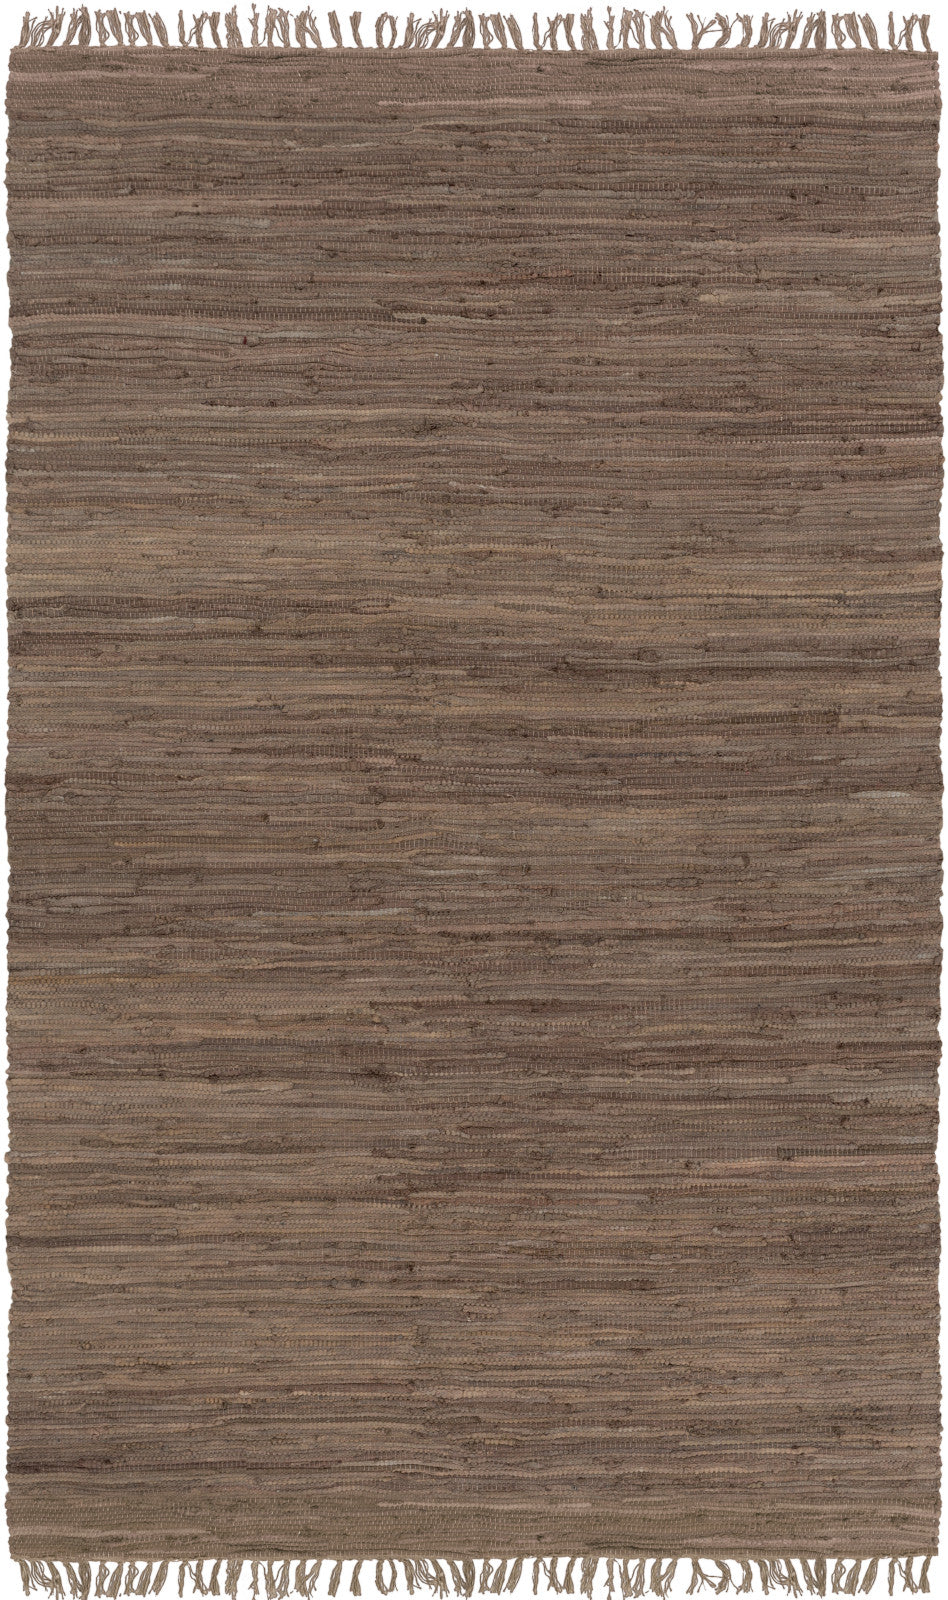 Artistic Weavers Easy Home Delaney Taupe Area Rug main image